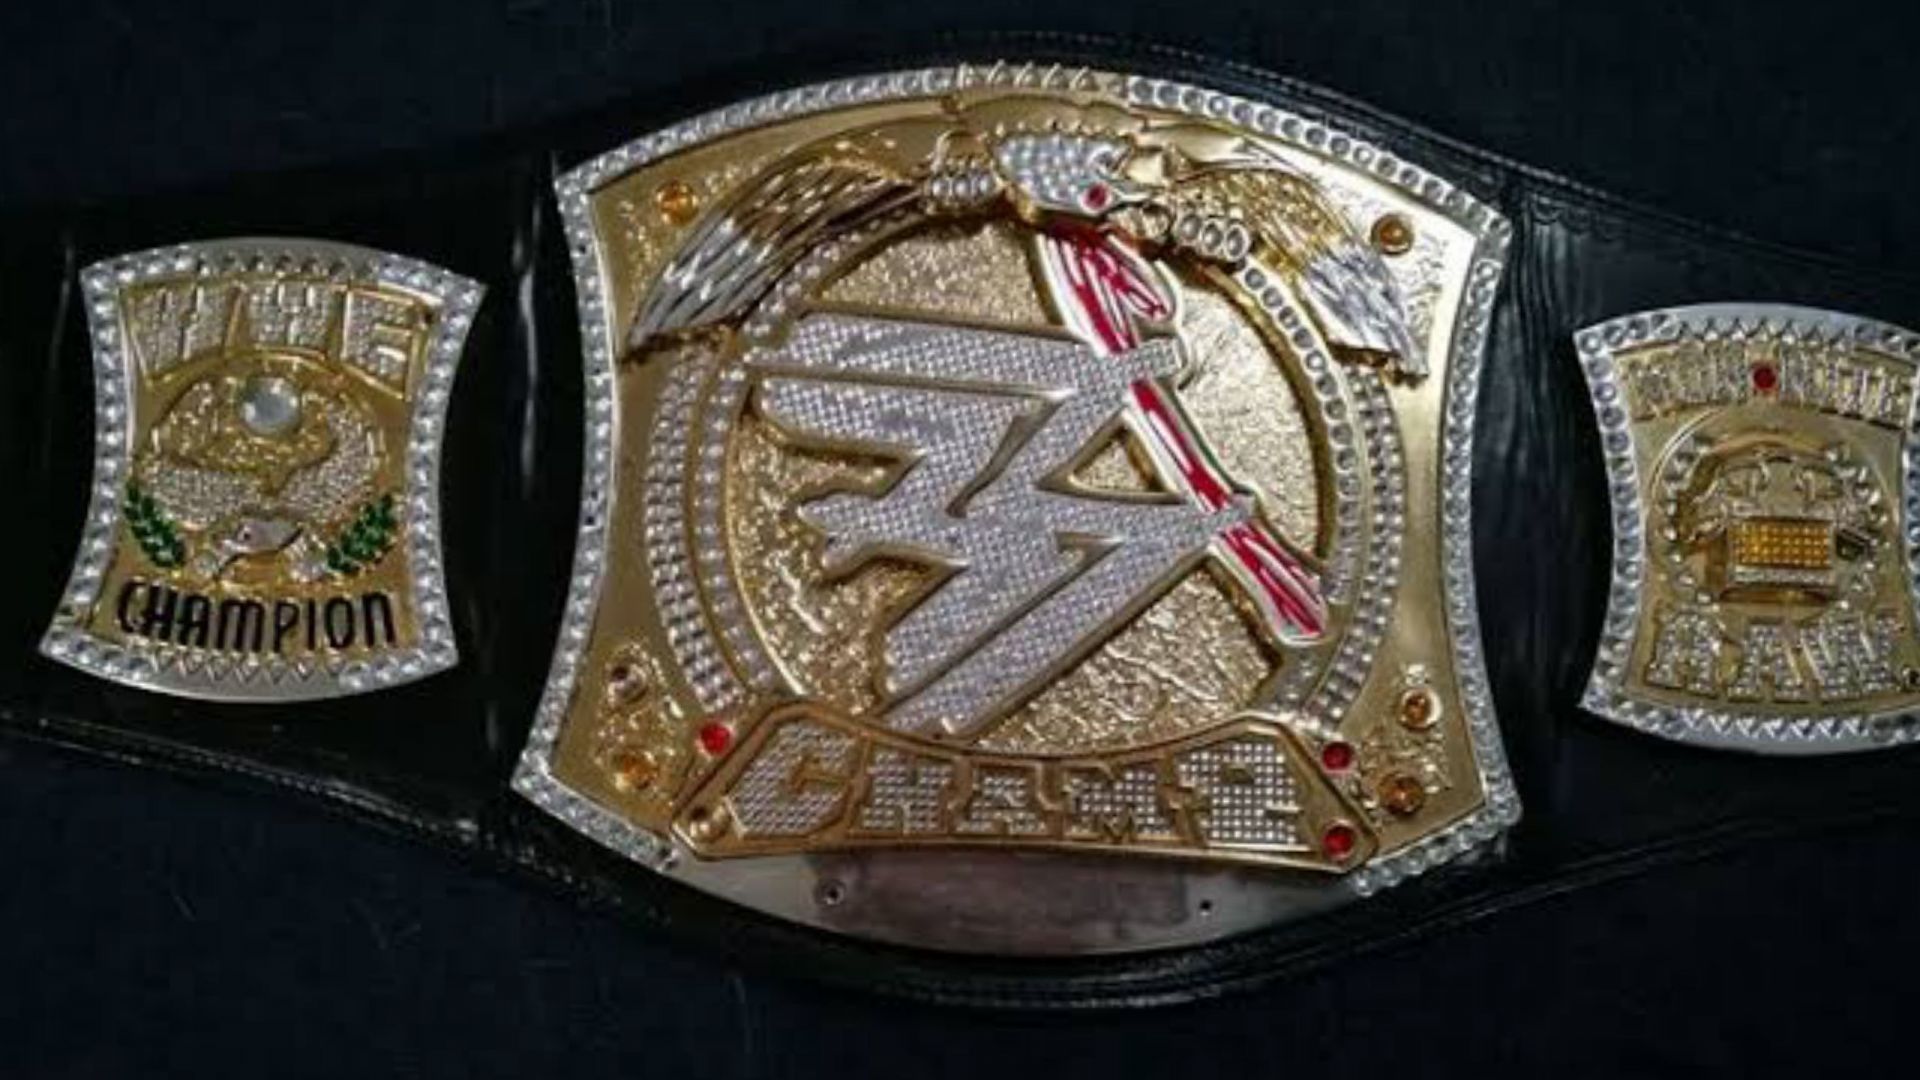 The spinner belt represented WWE Championship from 2005 to 2013.